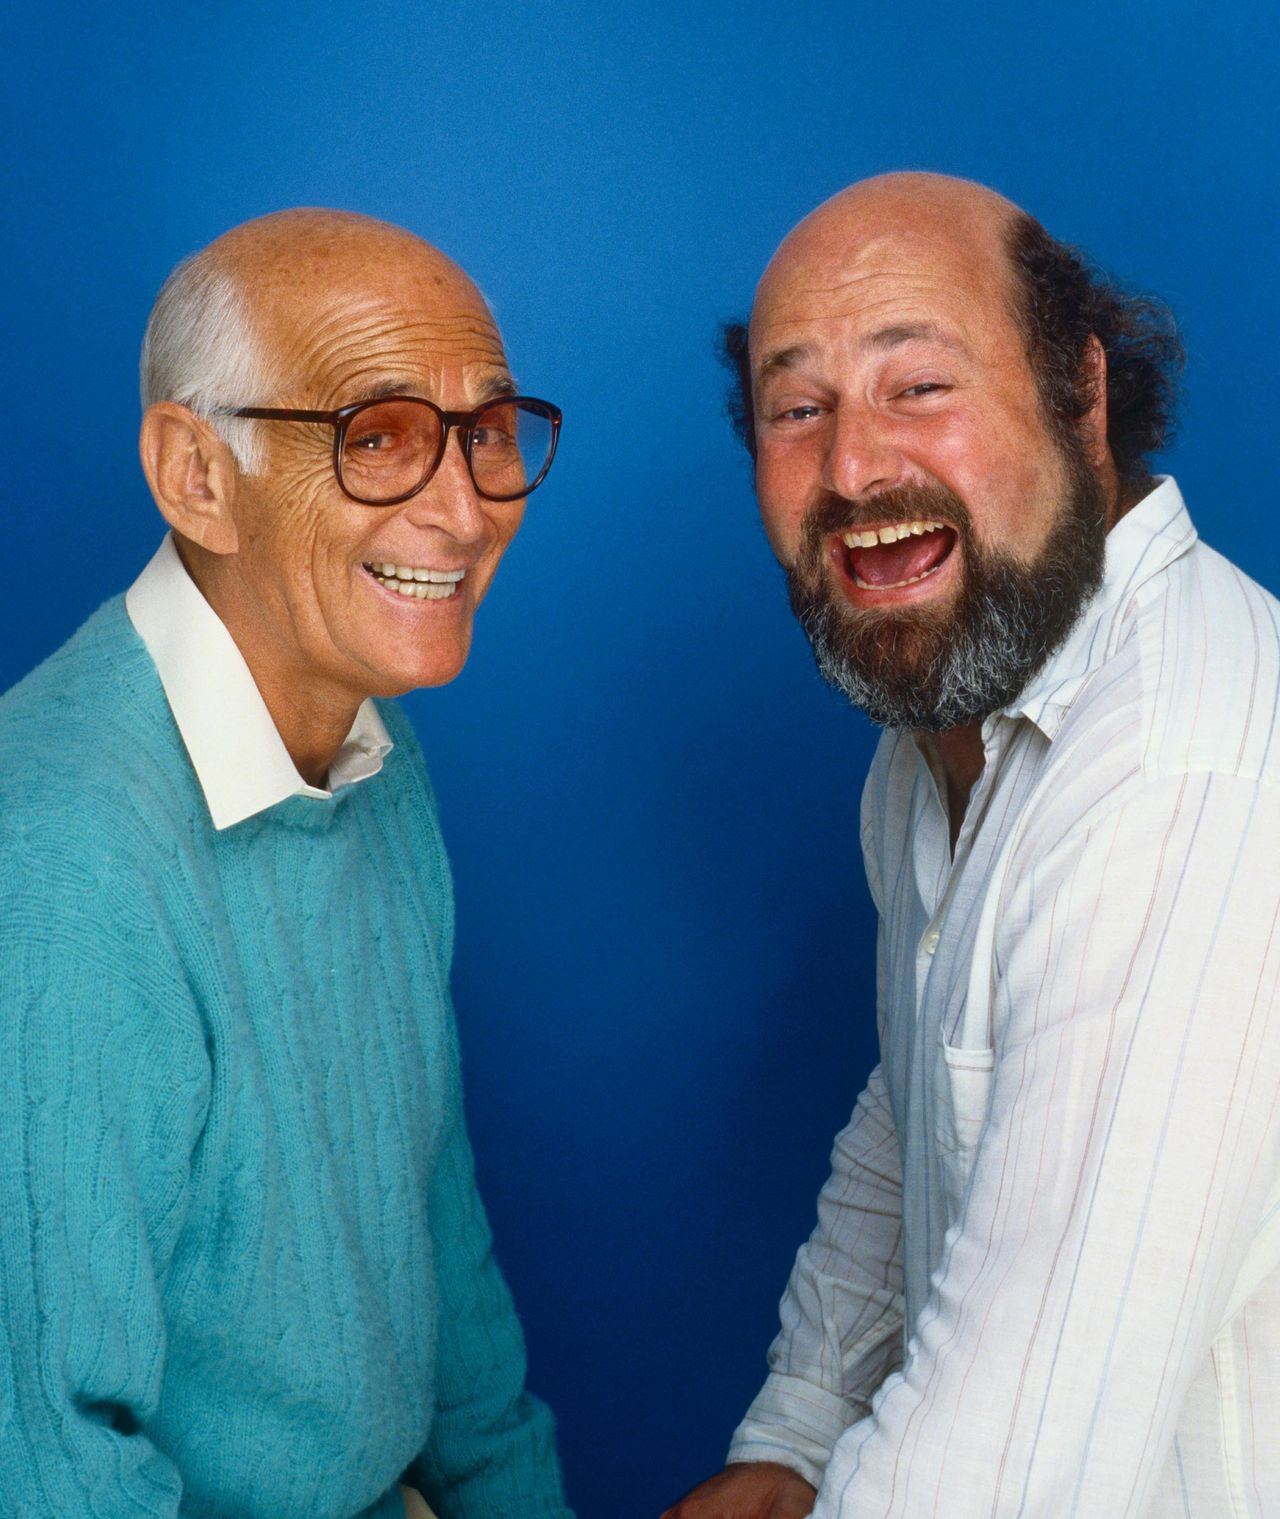 Actor and film director Rob Reiner (right) and Lear pose together during a 1987 Los Angeles photo portrait session.